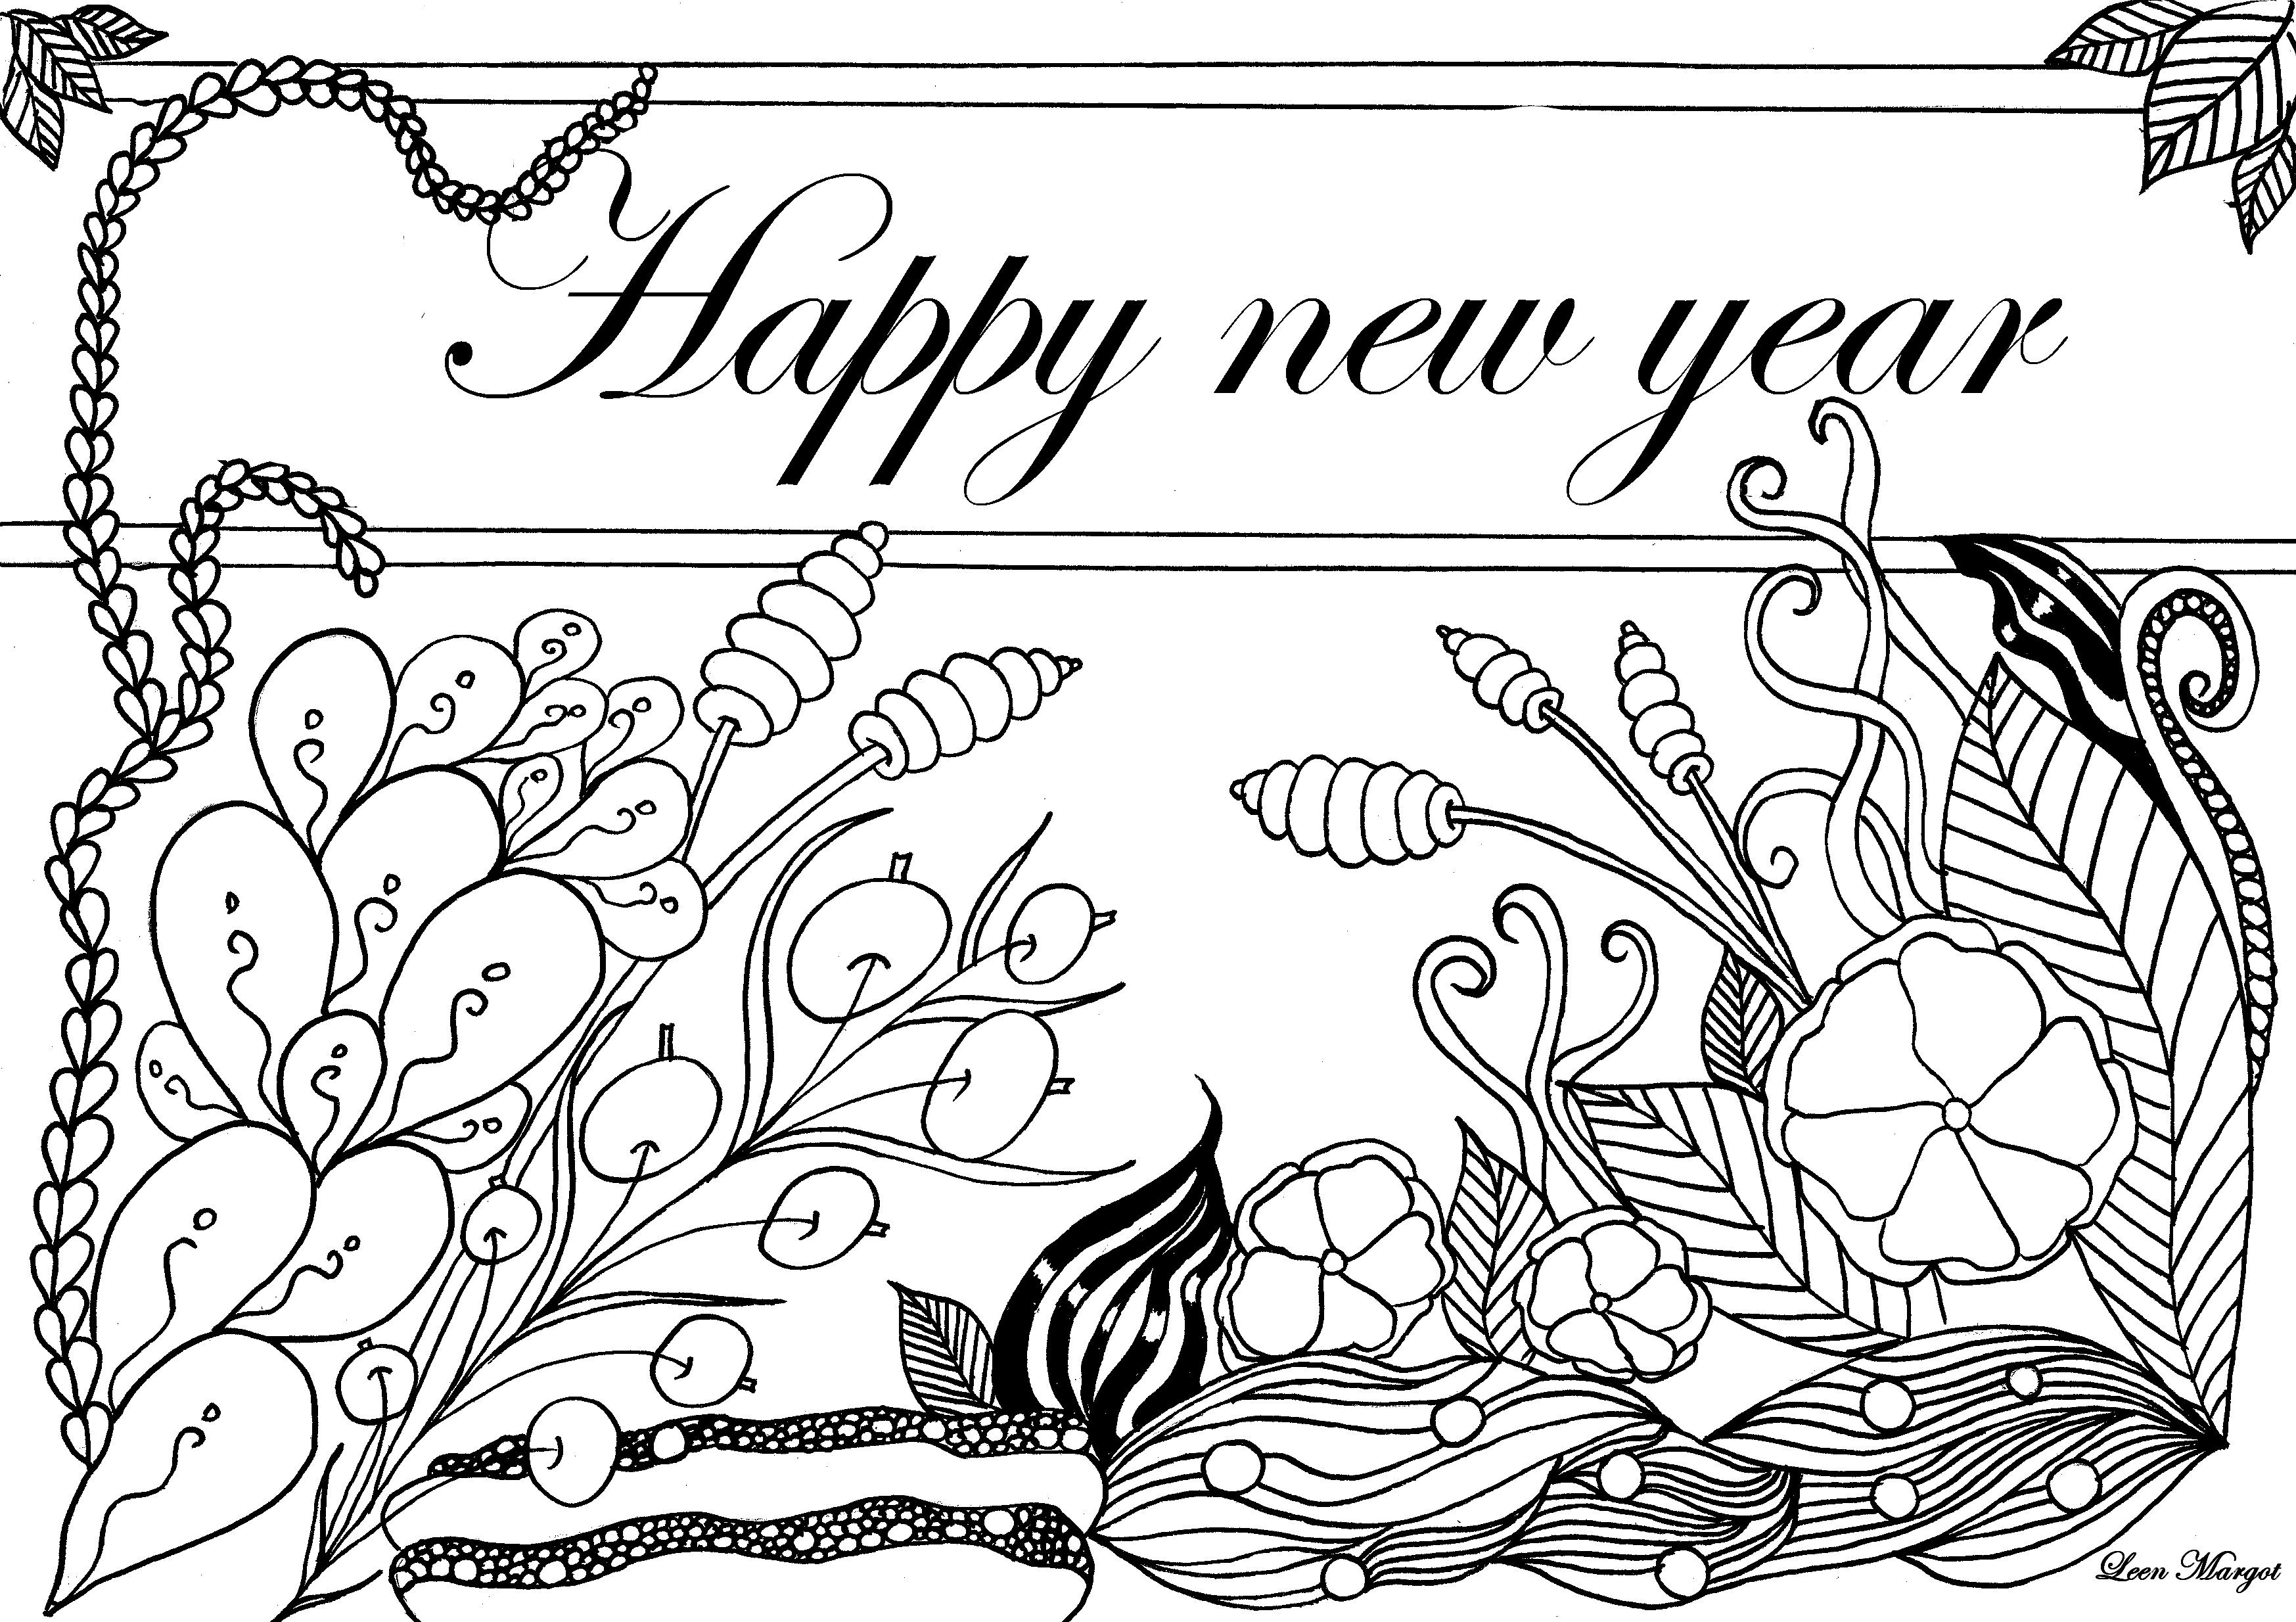 Happy New year ! - Coloring Pages for Adults